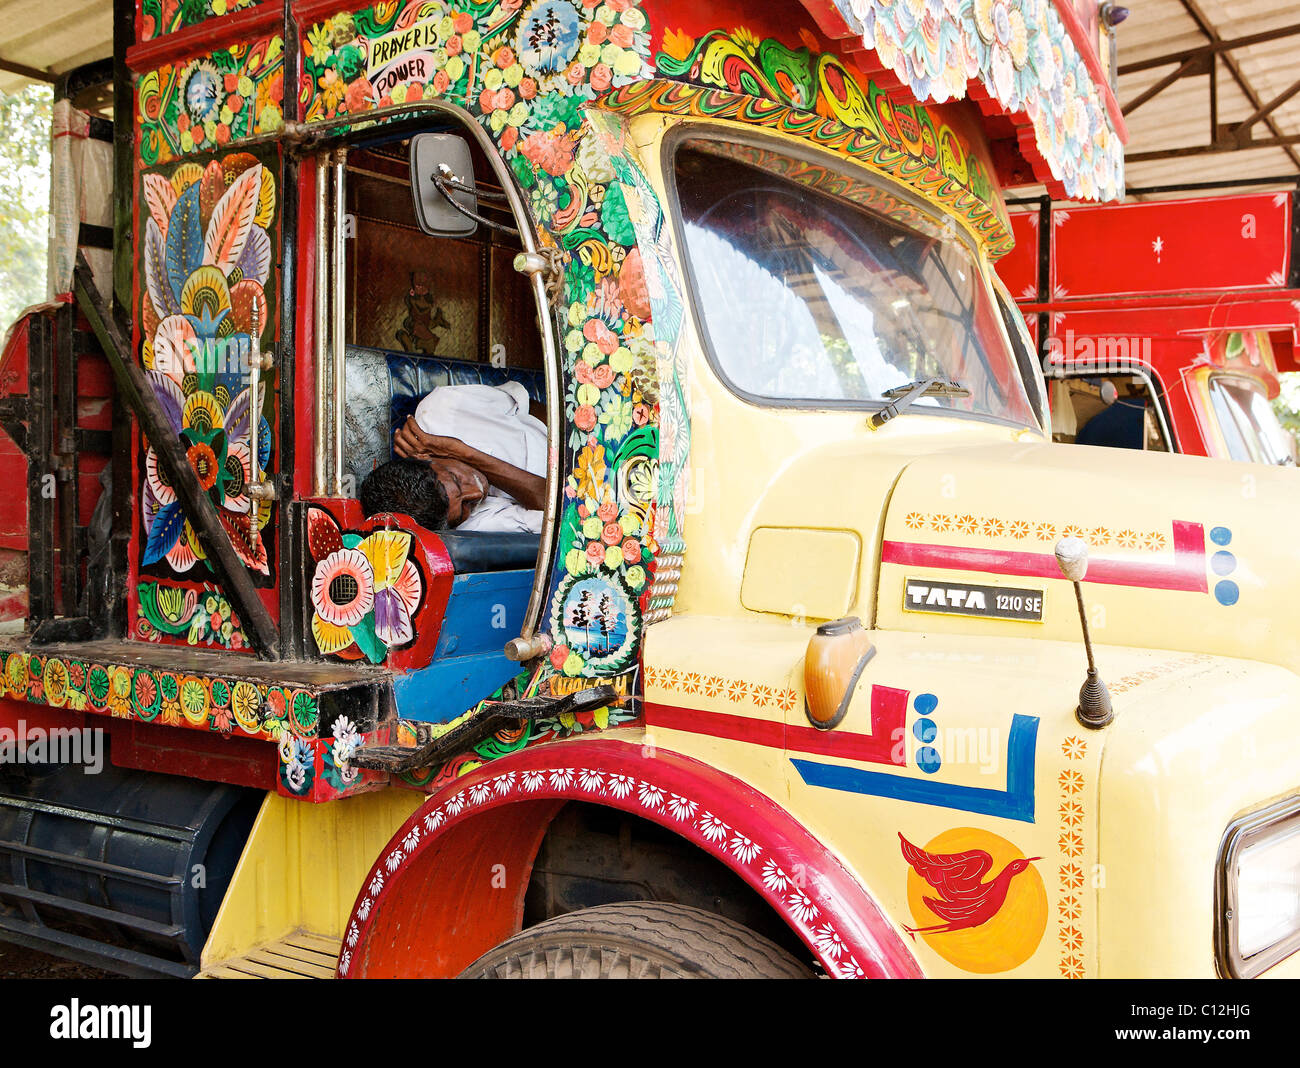 An indian sleeps in the cab or a decorated lorry cab, Kerala, India Stock Photo